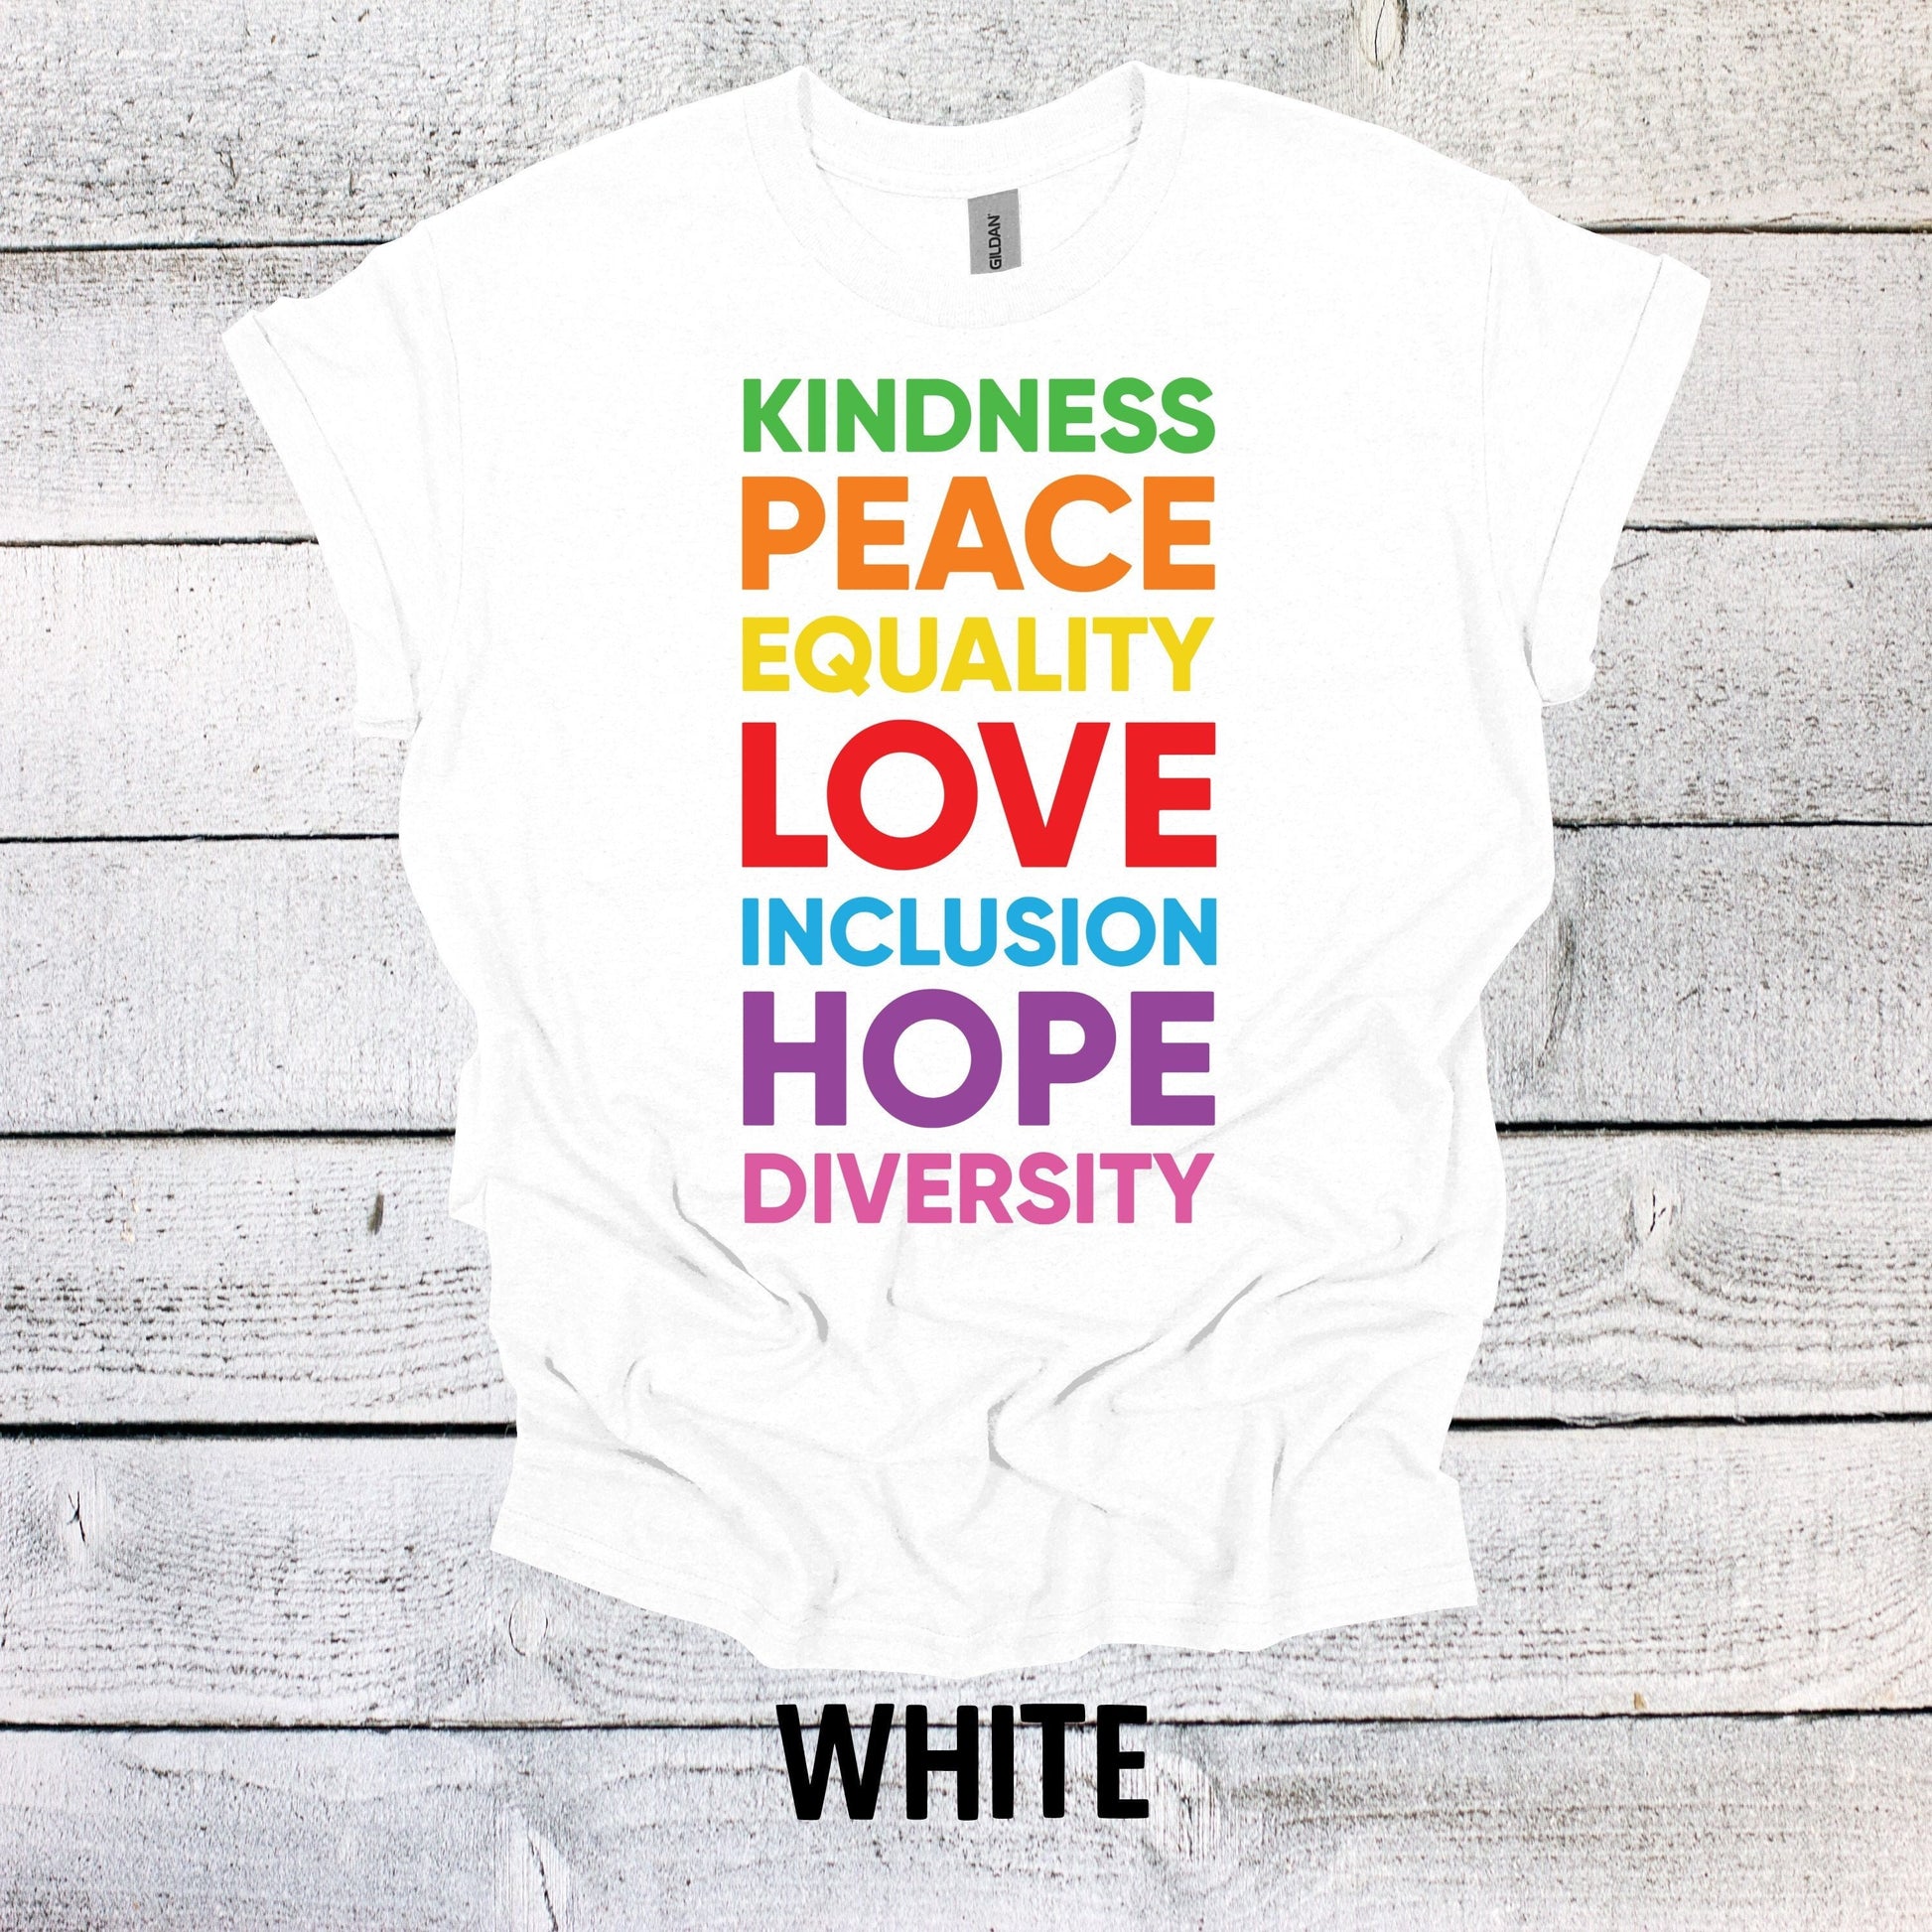 Kindness Peace Equality Rainbow Pride Shirt - LGBTQ Tee for All Genders - Pride Month Apparel